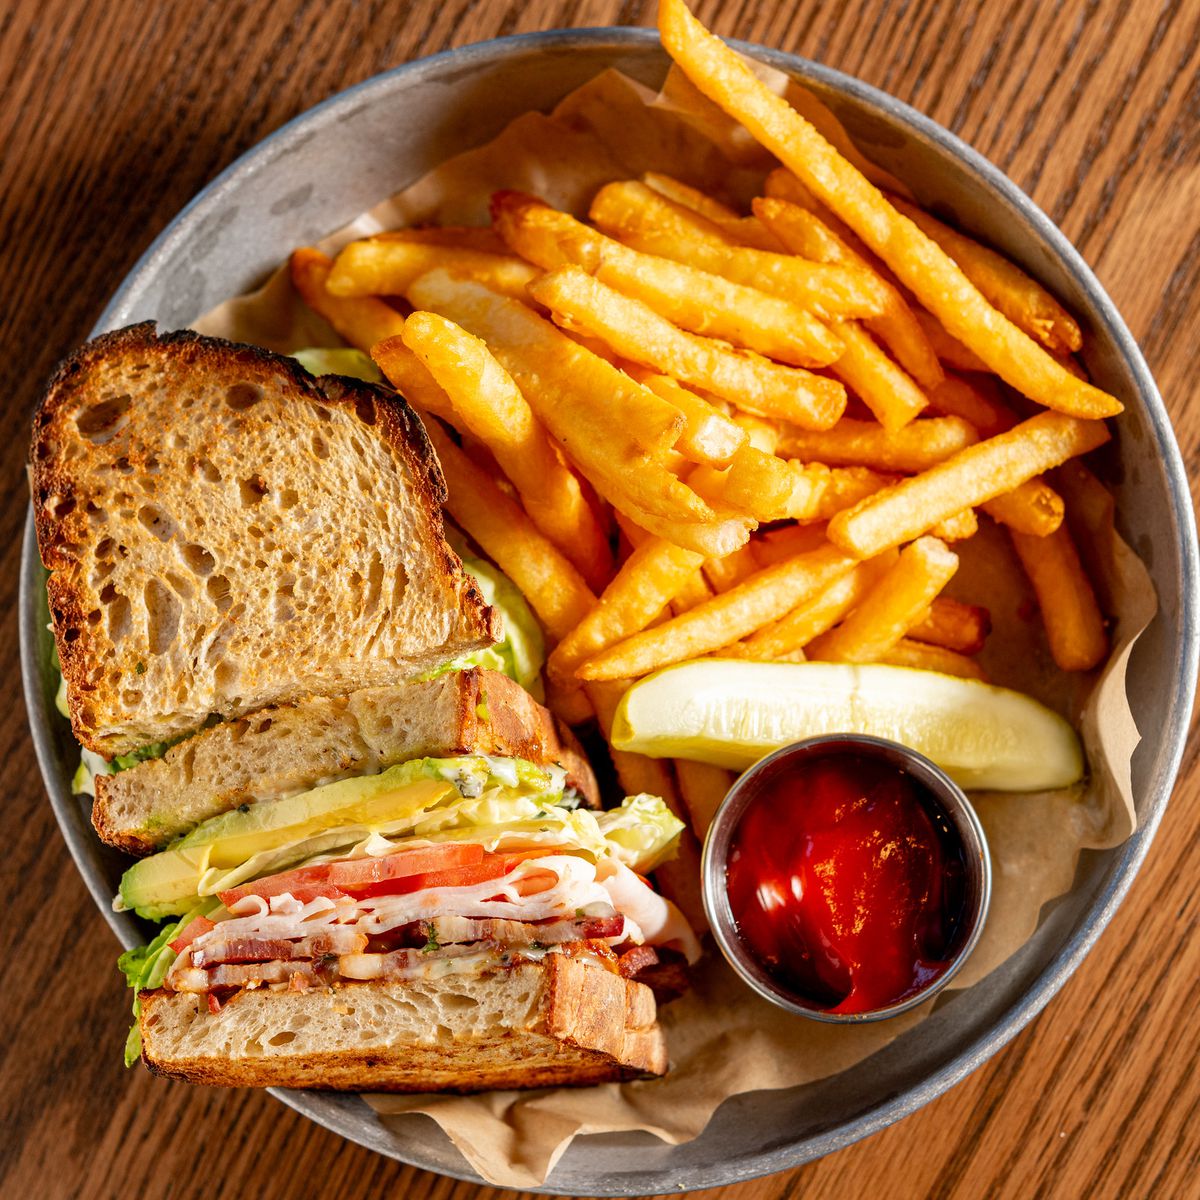 A round metal plate holds a large sandwich and French fries.